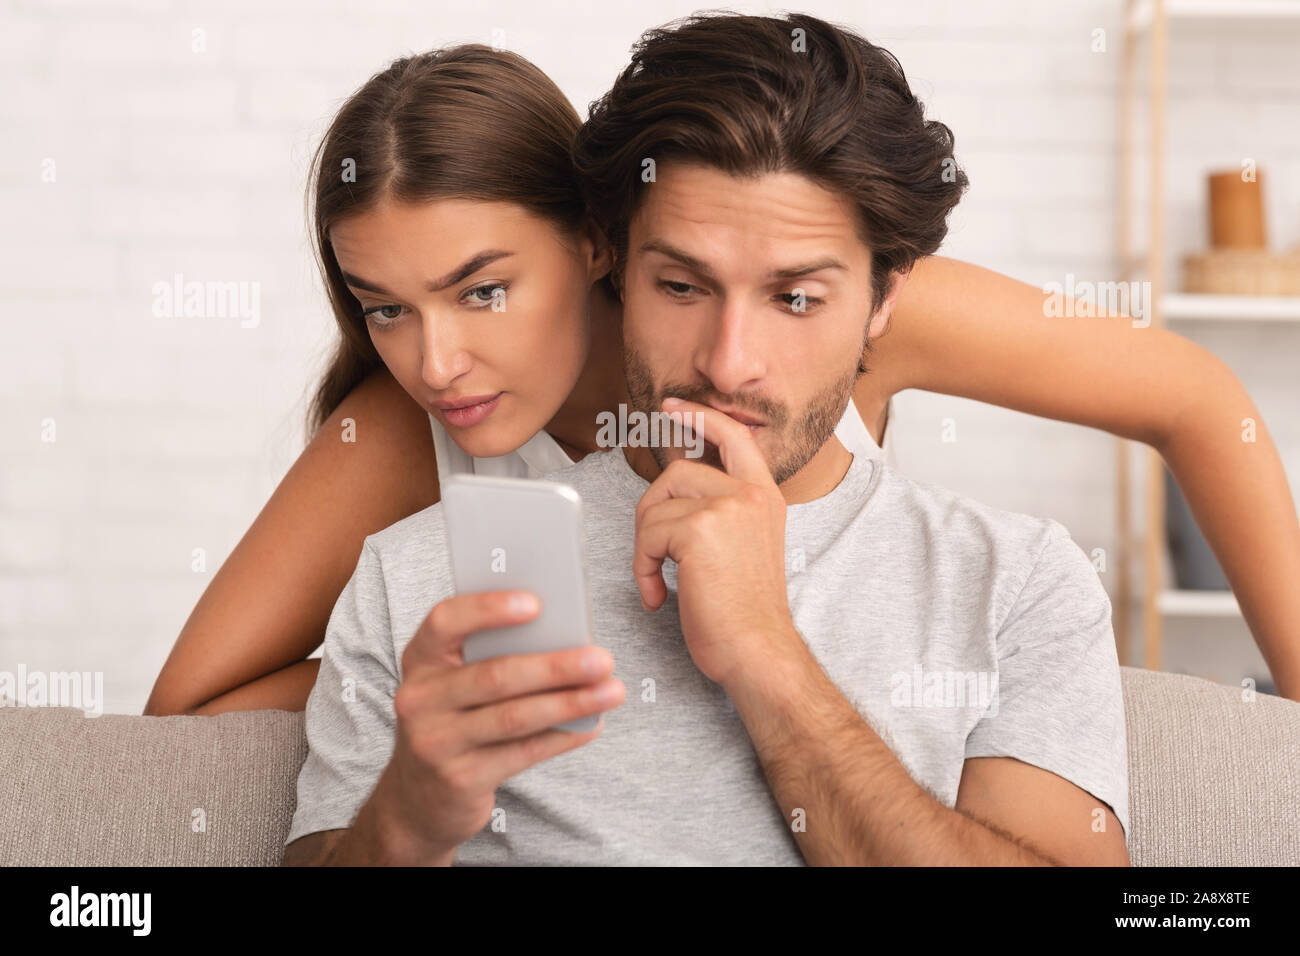 Wife Spying On Husband While He Chatting On Phone Indoor Stock Photo